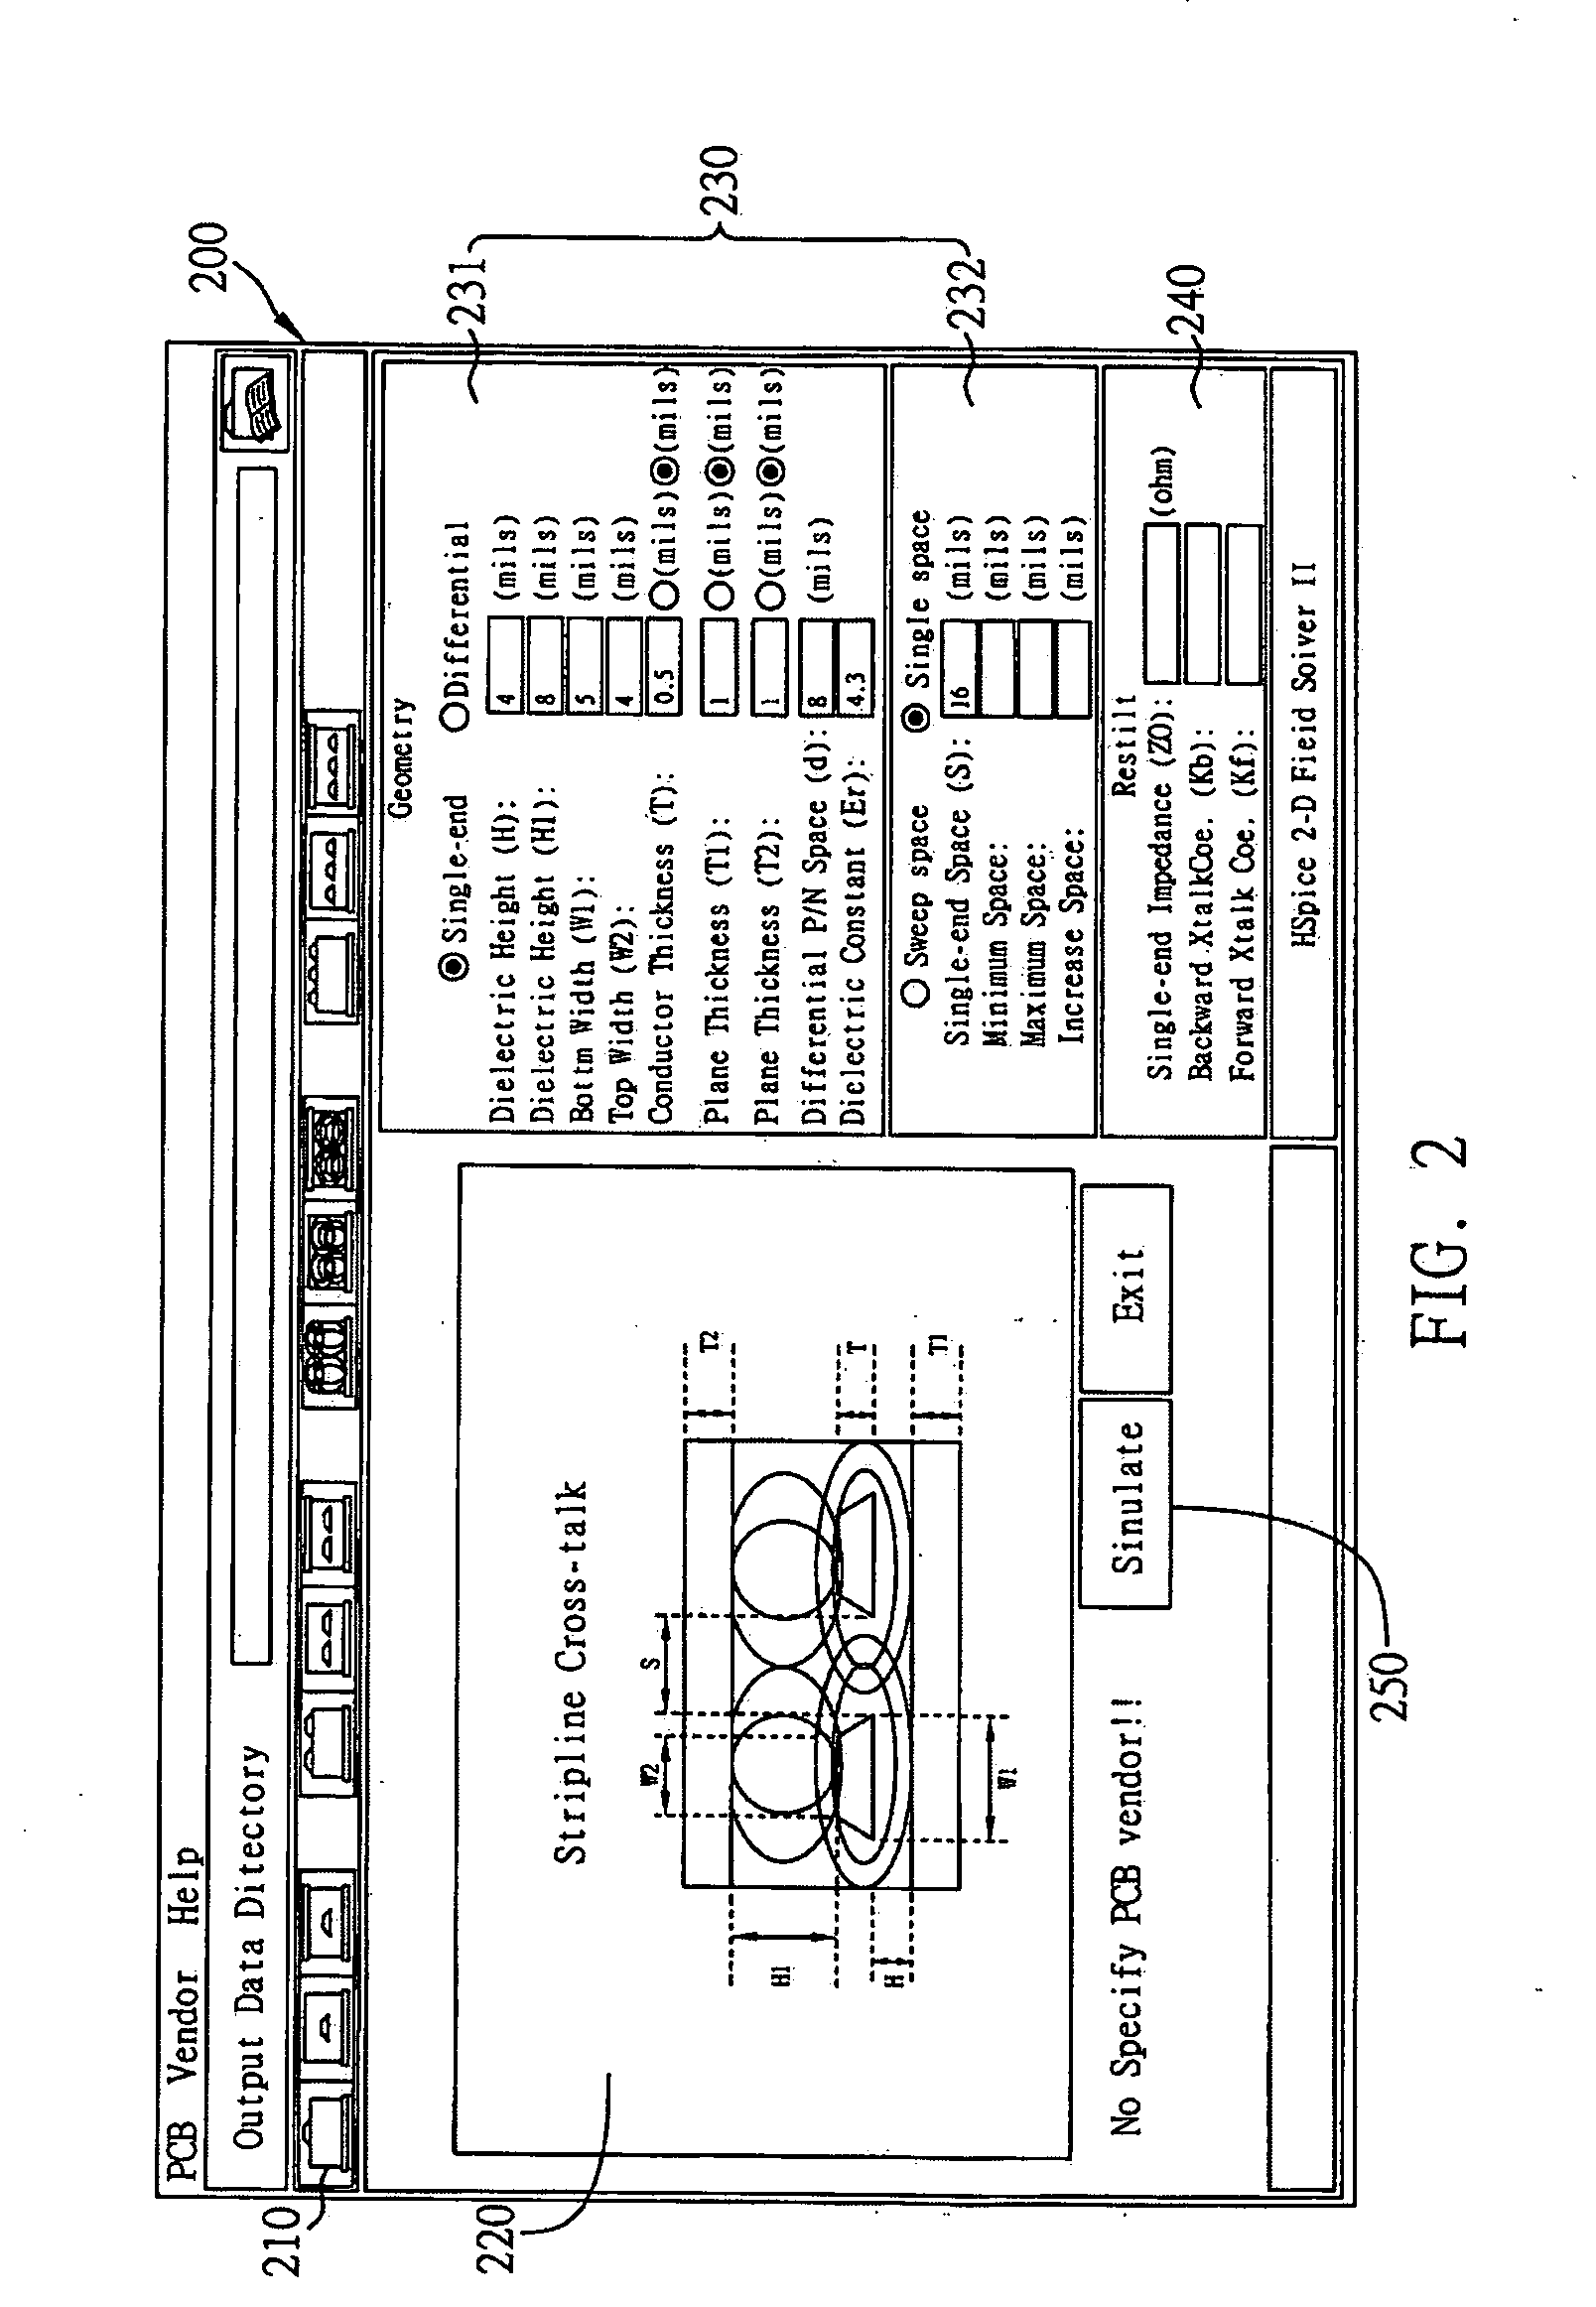 Computer-aided ultrahigh-frequency circuit model simulation method and system